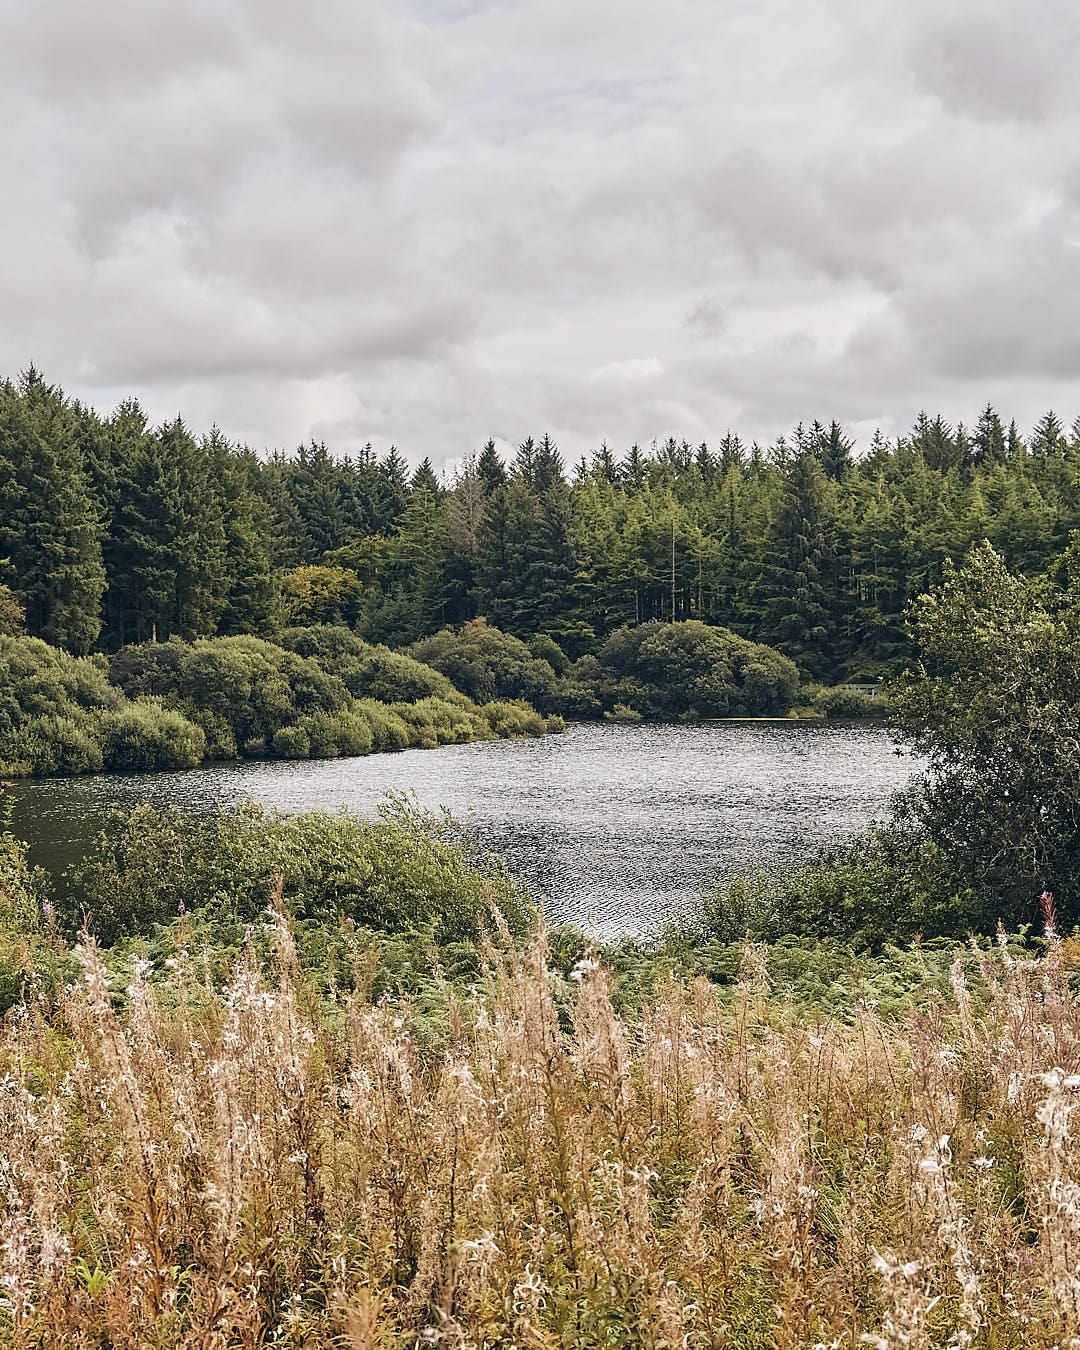 A lake surrounded by tall grass and trees.